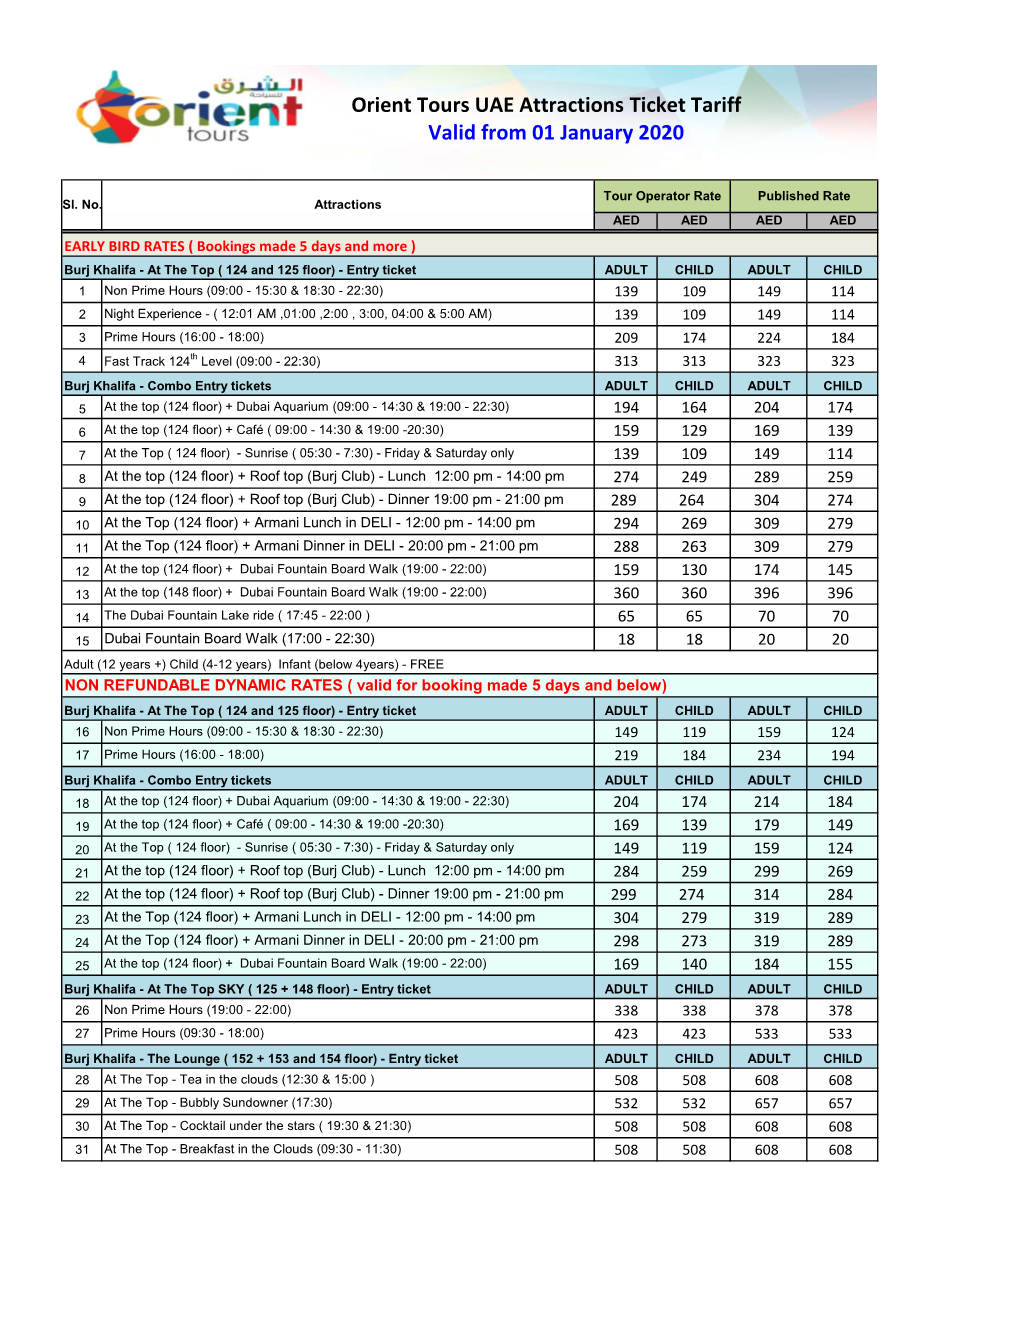 Orient Tours UAE Attractions Ticket Tariff Valid from 01 January 2020